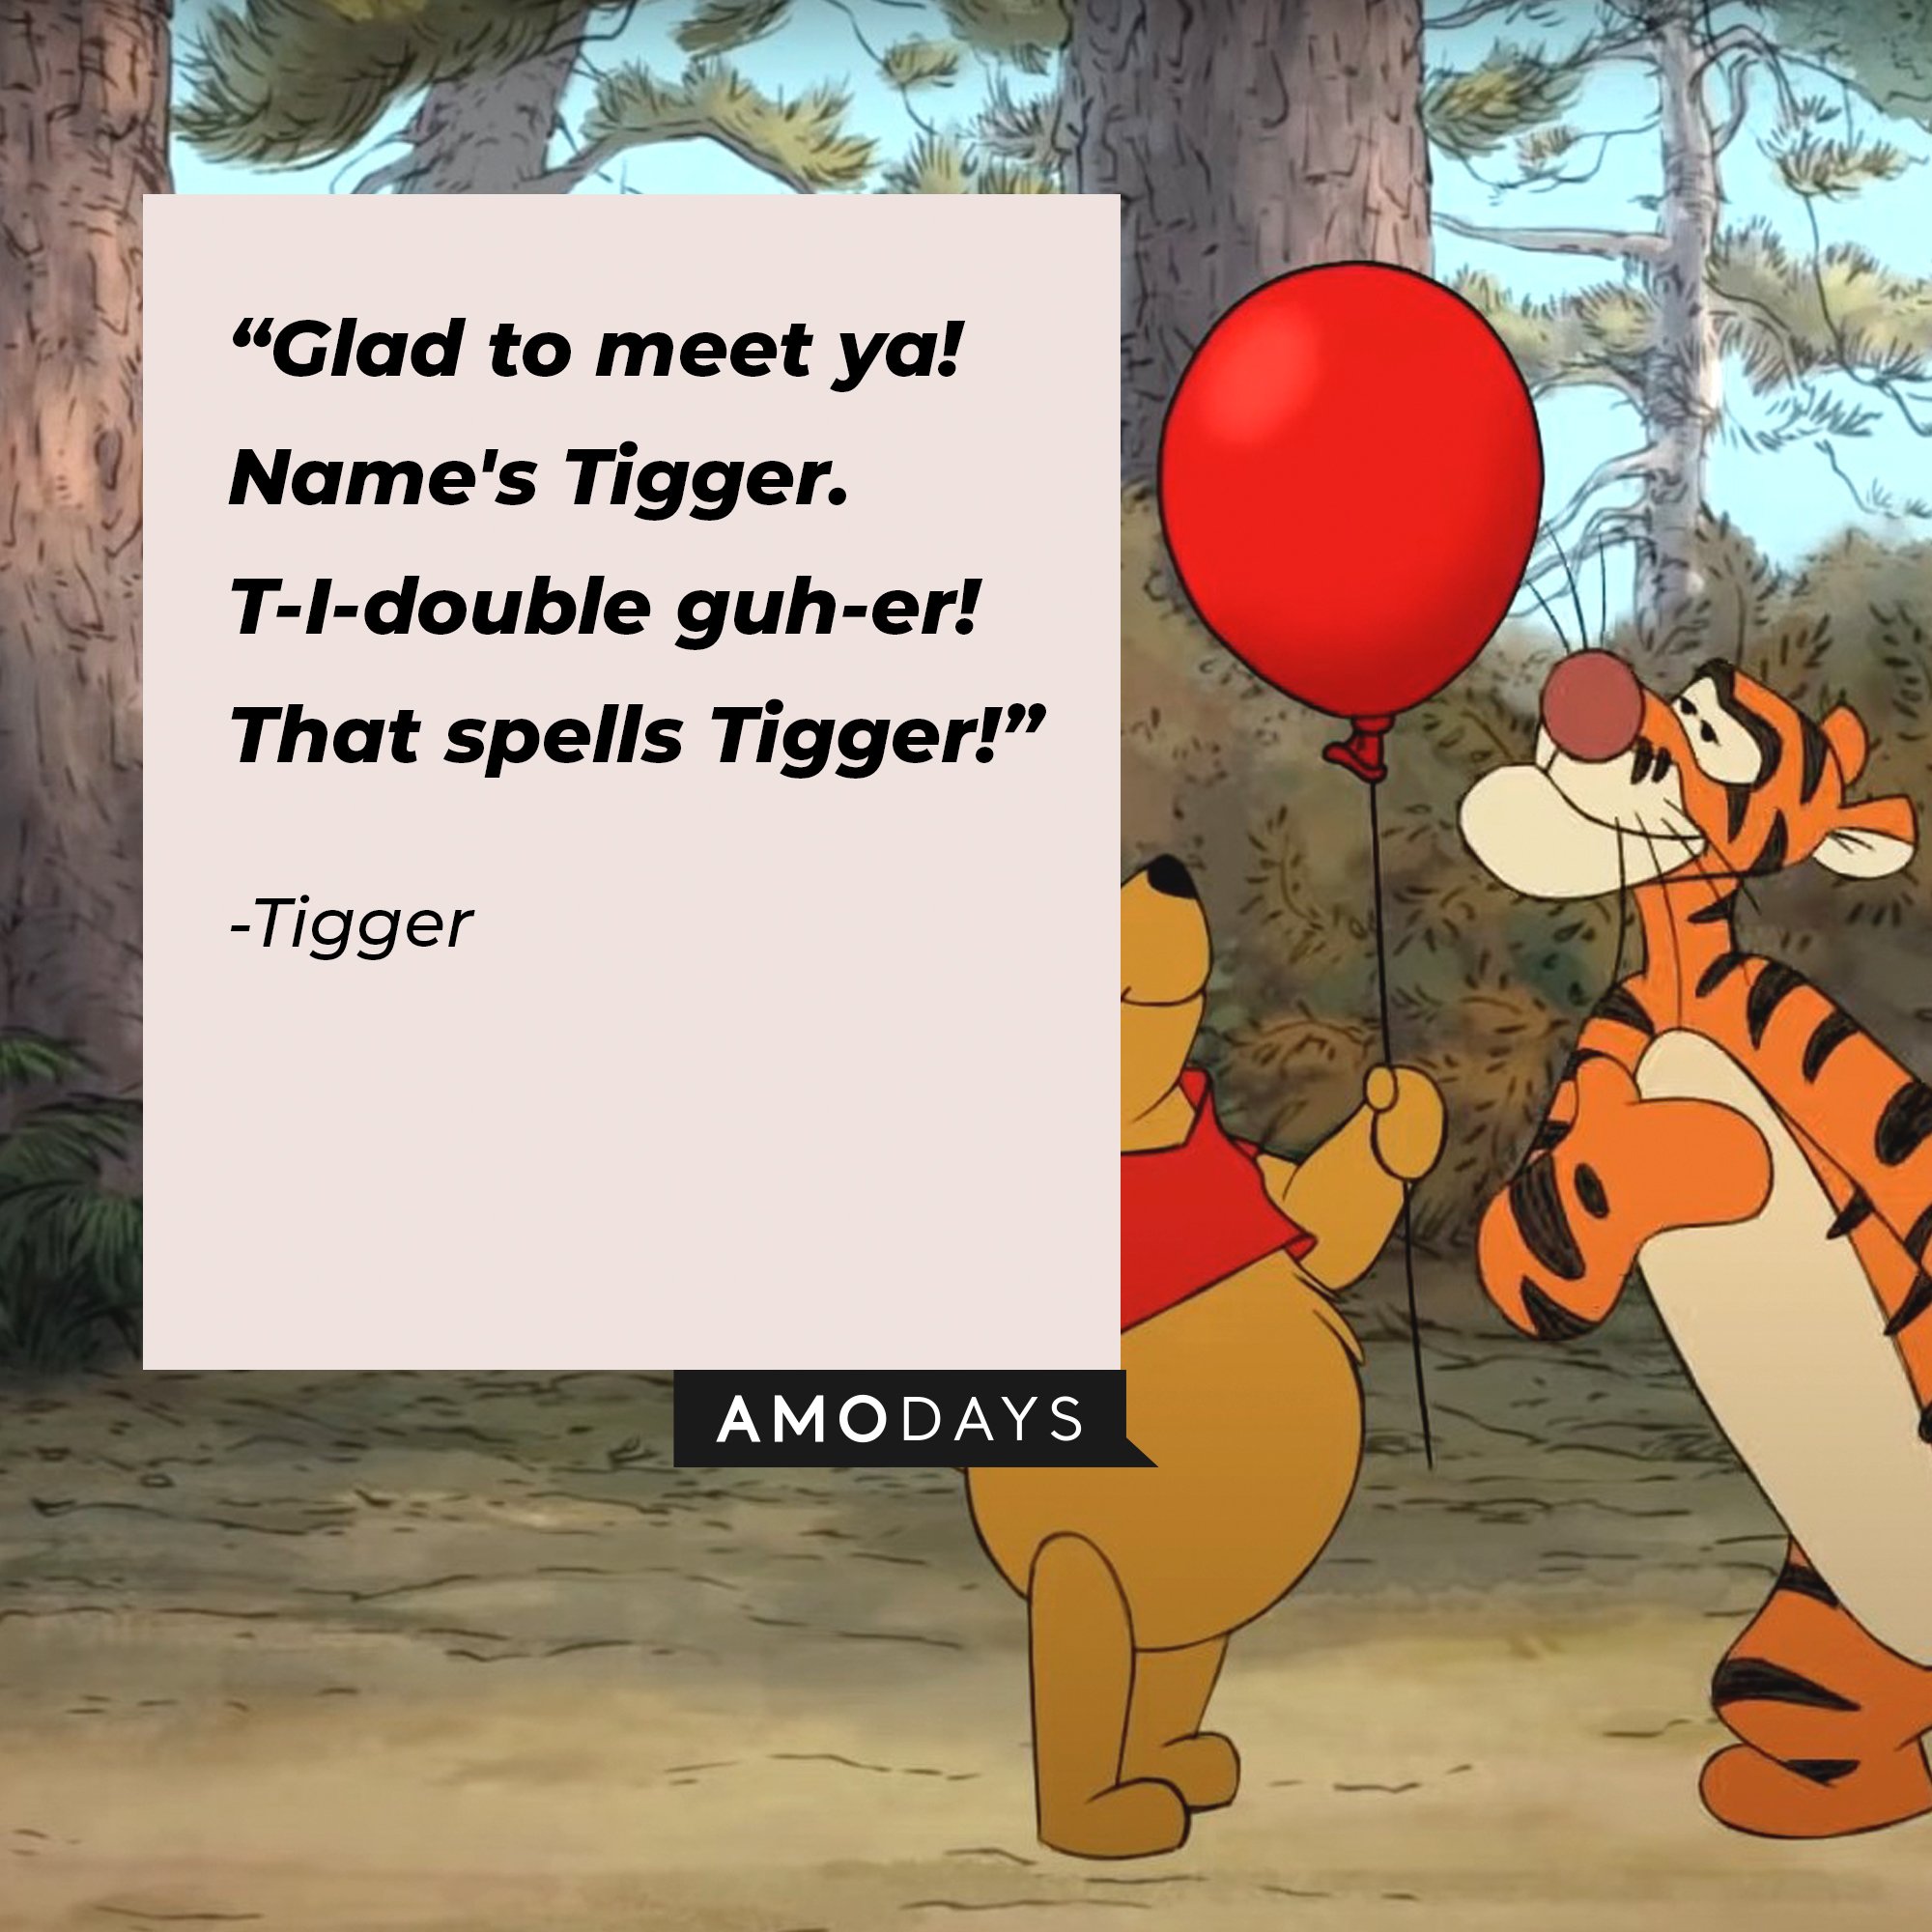 Tigger's quote: "Glad to meet ya! Name's Tigger. T-I-double guh-er! That spells Tigger!" | Image: AmoDays